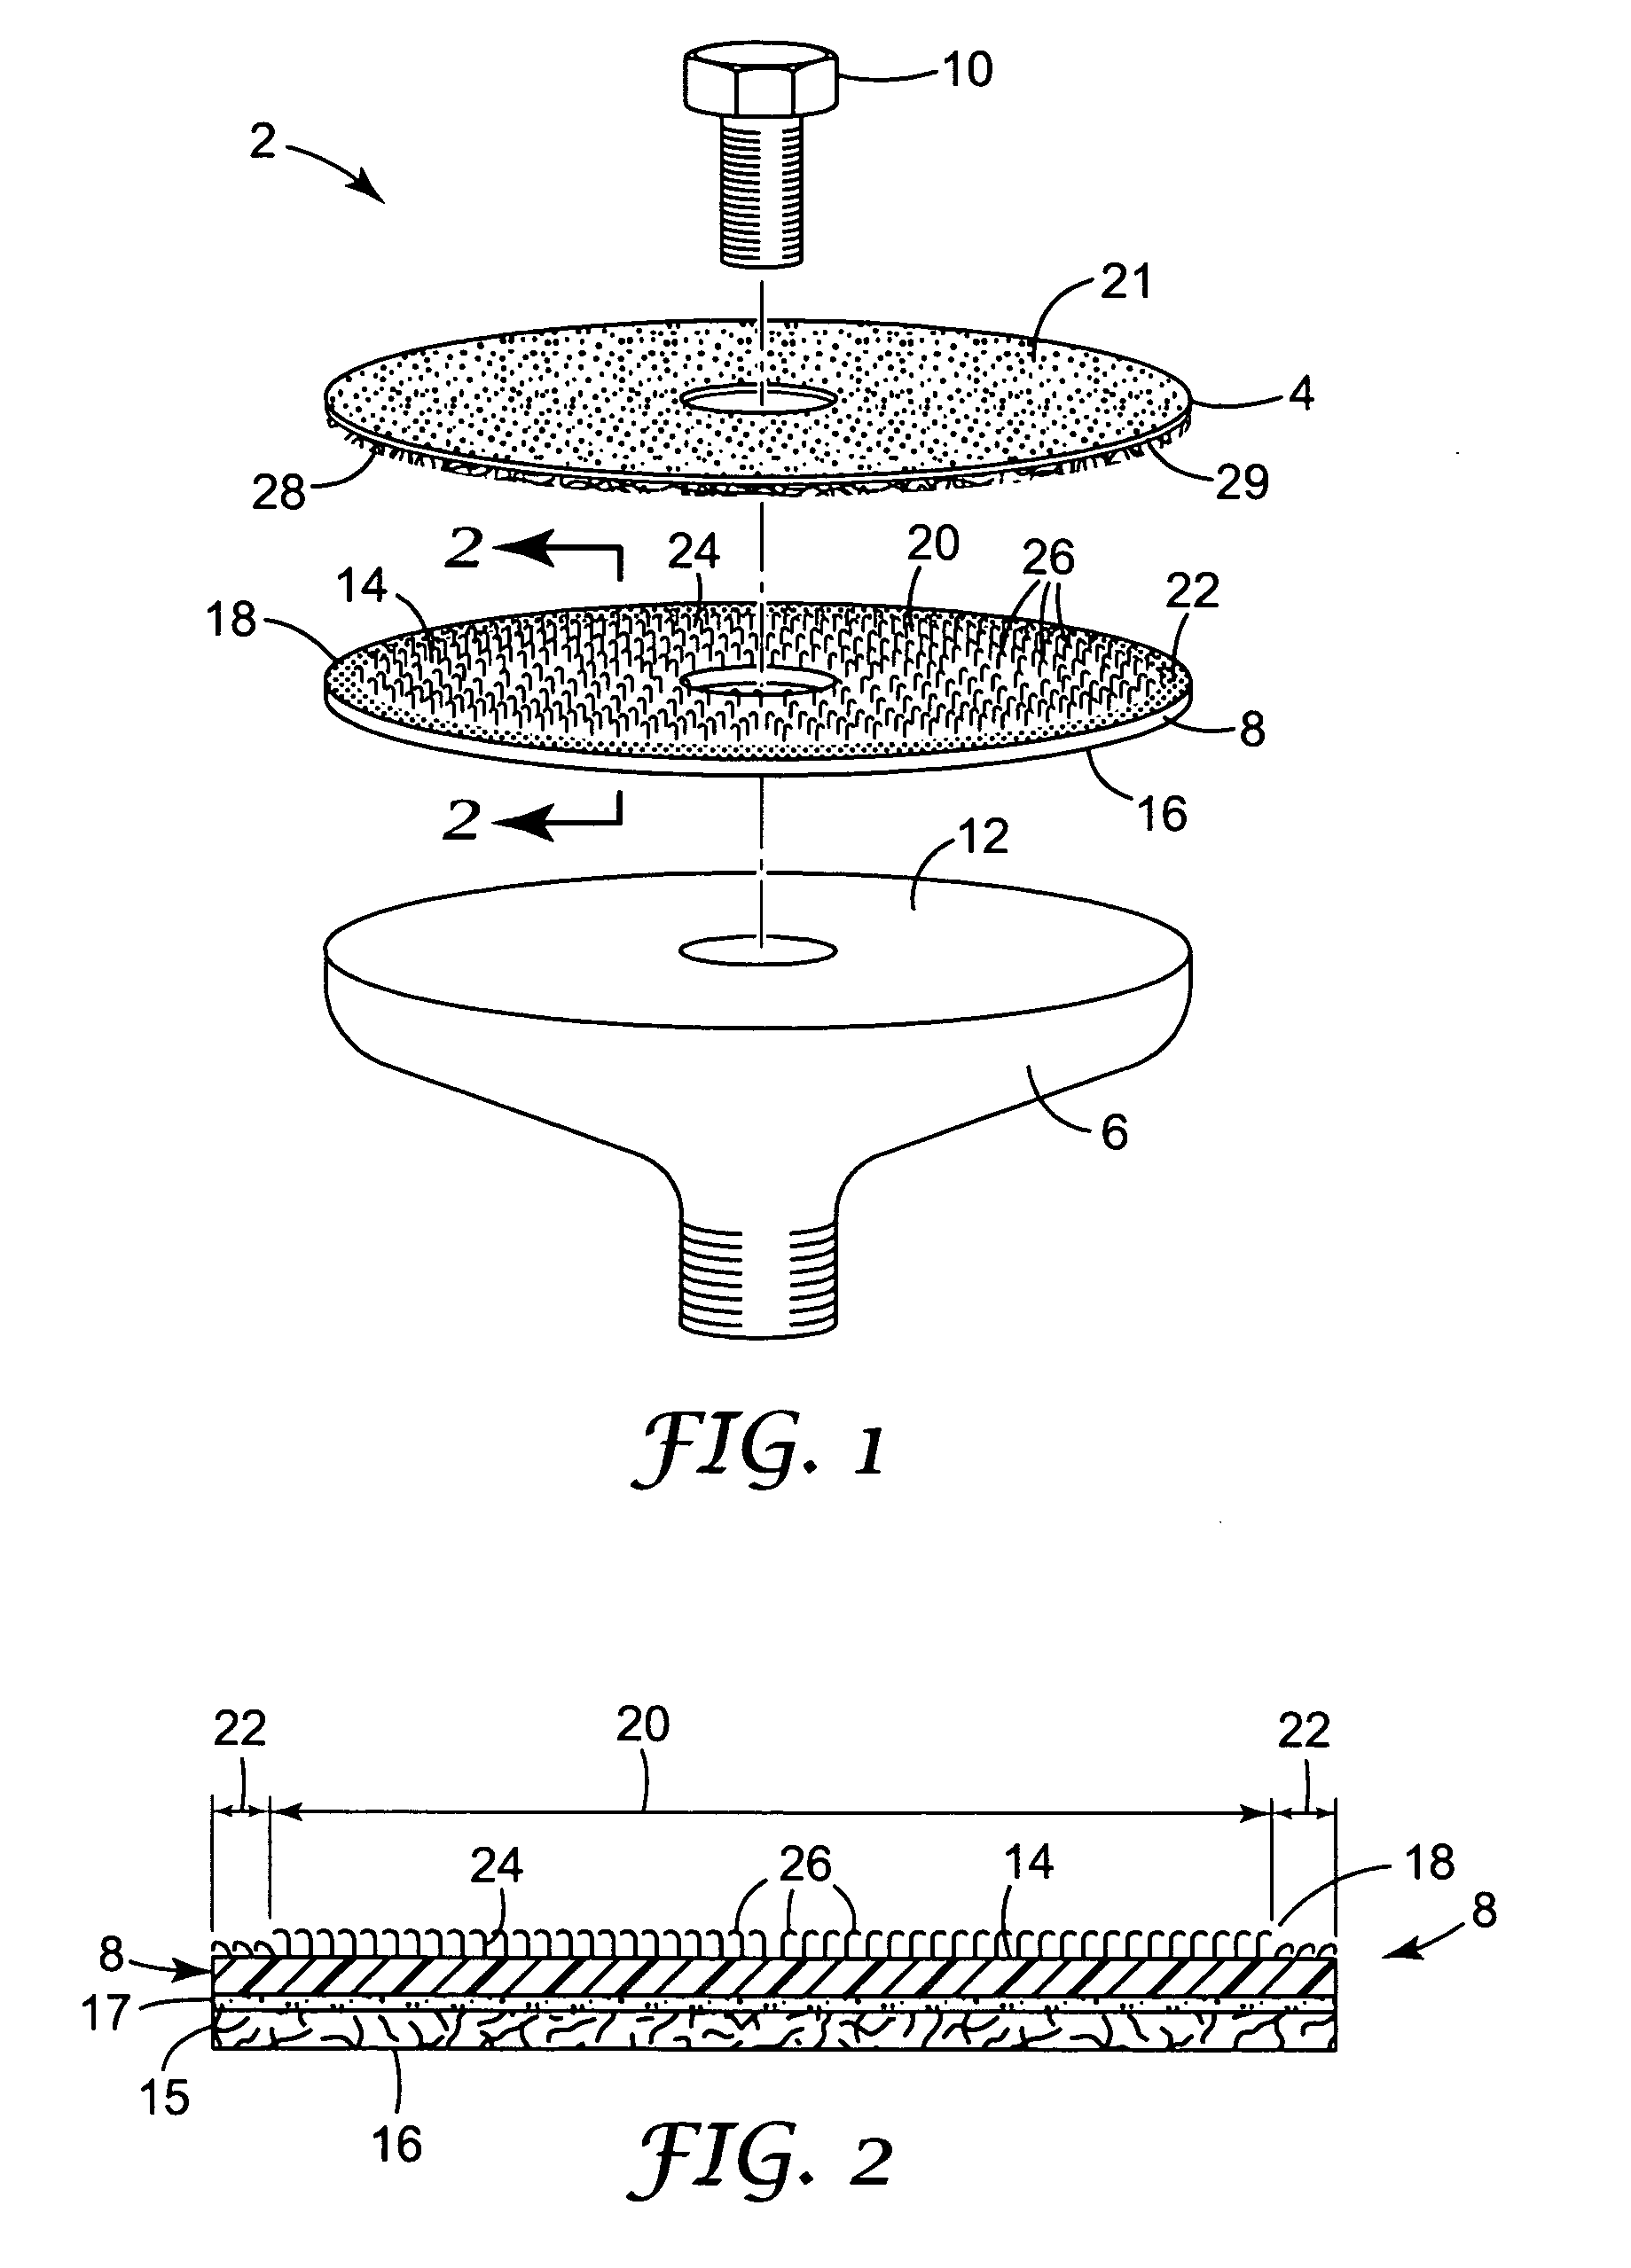 Attachment system for a sanding tool